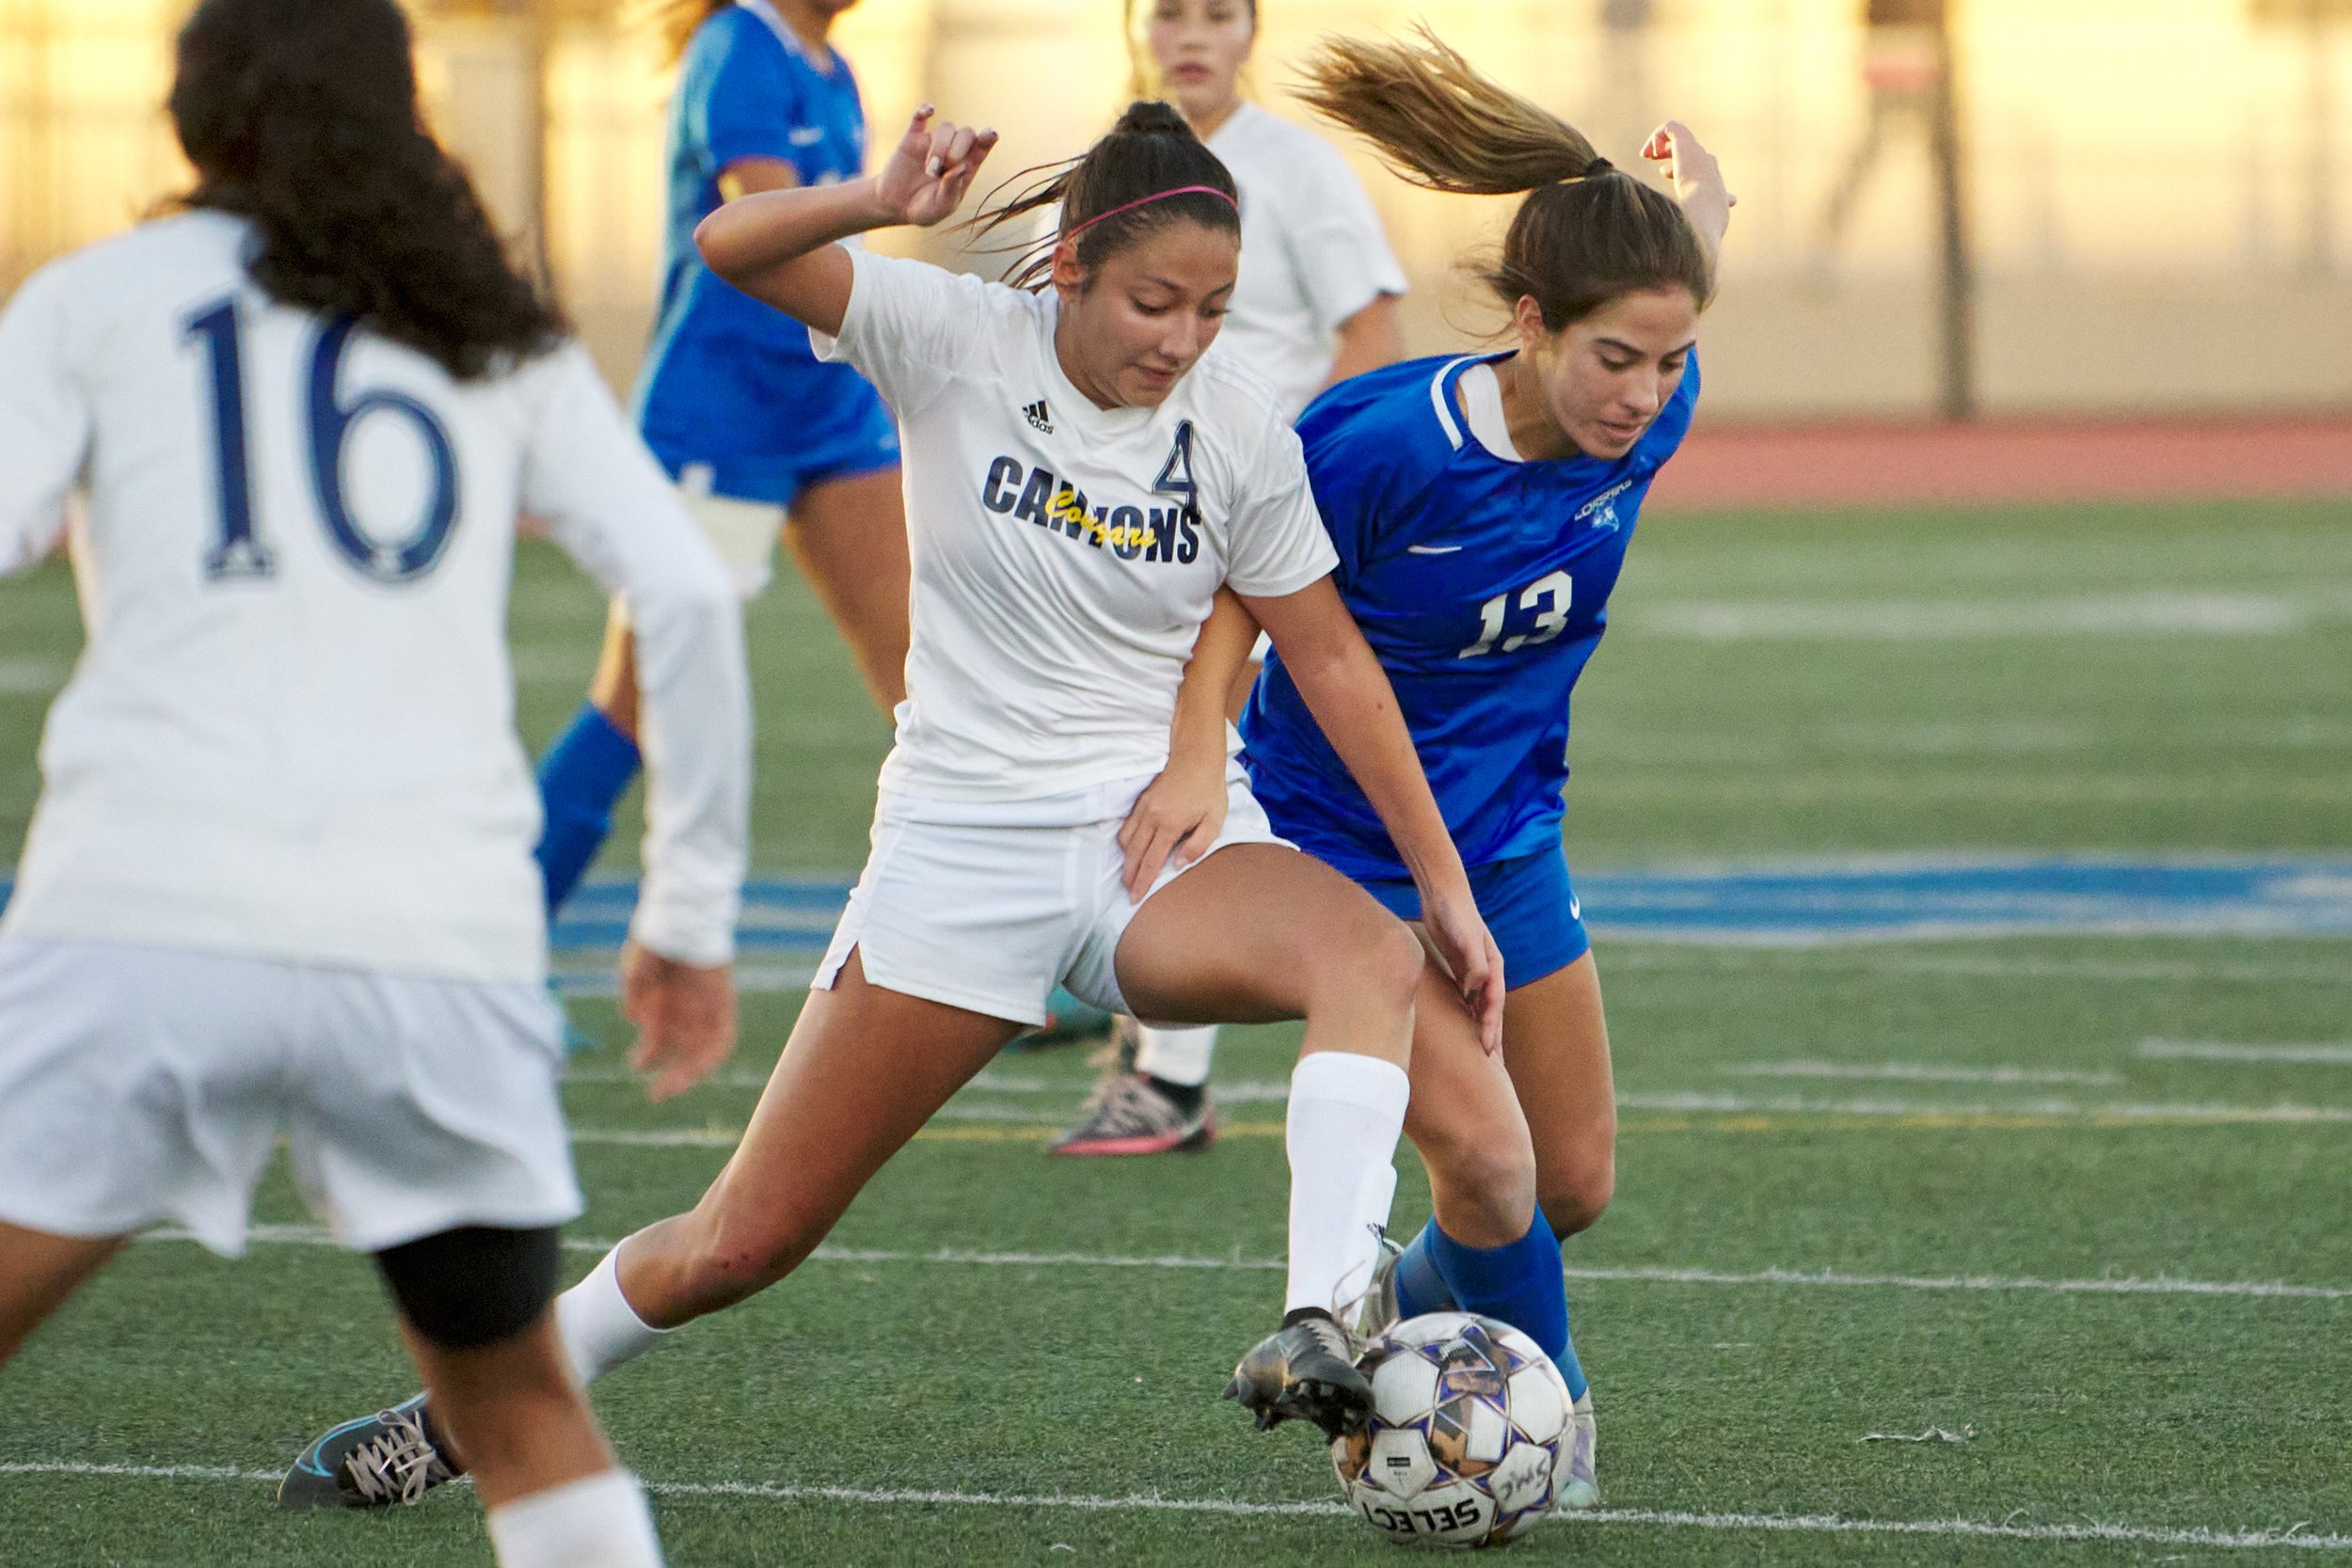  College of the Canyons Cougars' Giselle Gomez maintains control of the ball away from Santa Monica College Corsairs' Sophie Doumitt during the women's soccer match on Thursday, Nov. 10, 2022, at Corsair Field in Santa Monica, Calif. The Corsairs los